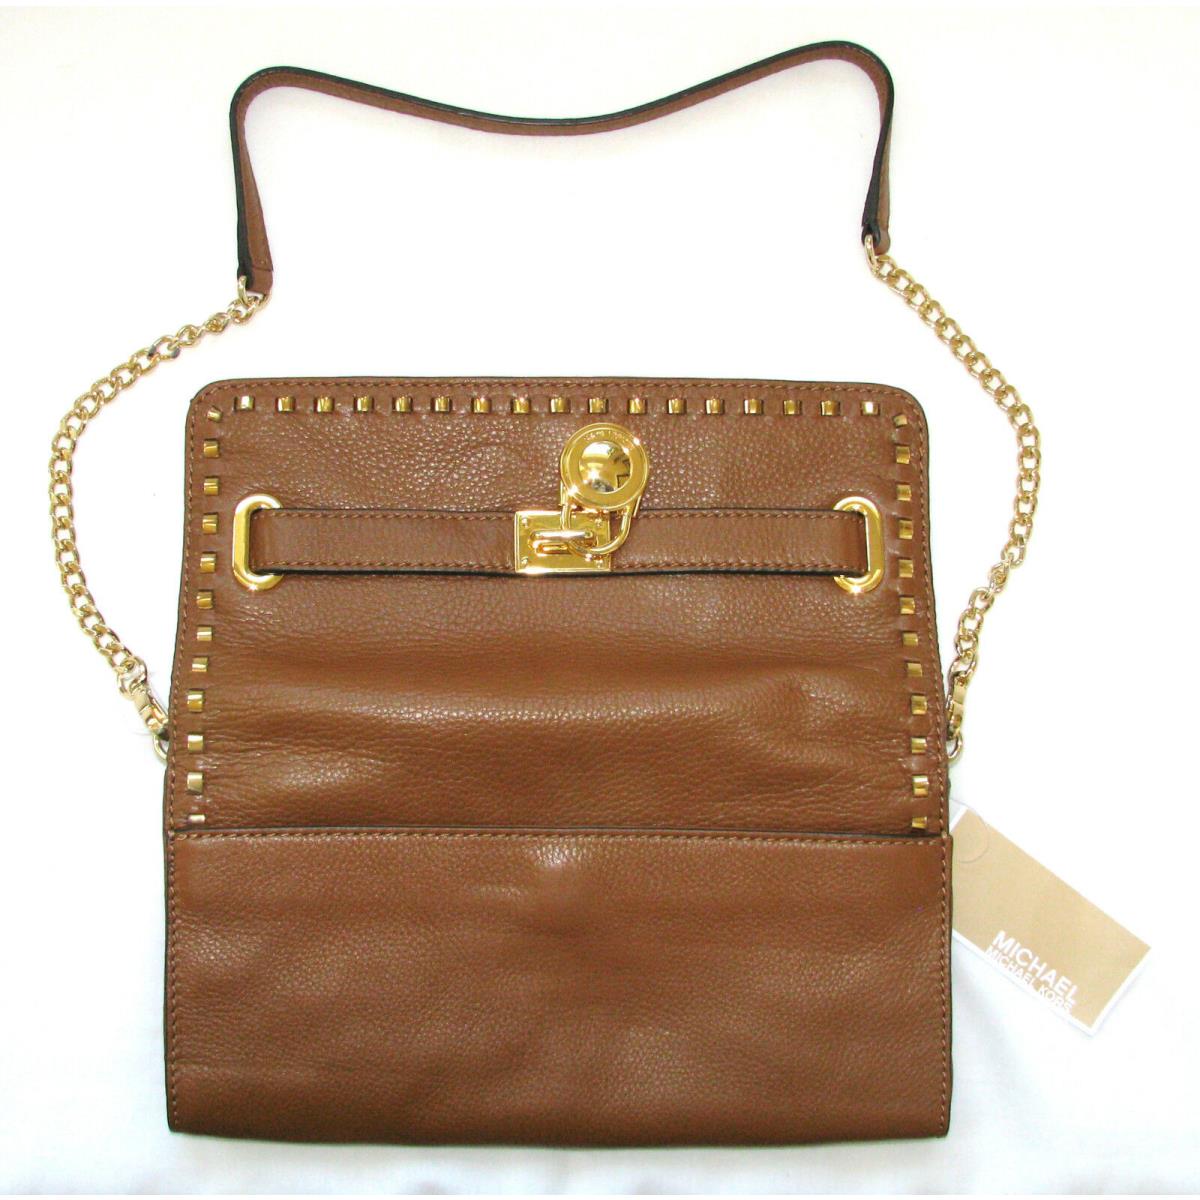 New-michael Kors Hamilton Whipped Luggage Brown Leather+gold Clutch Shoulder Bag